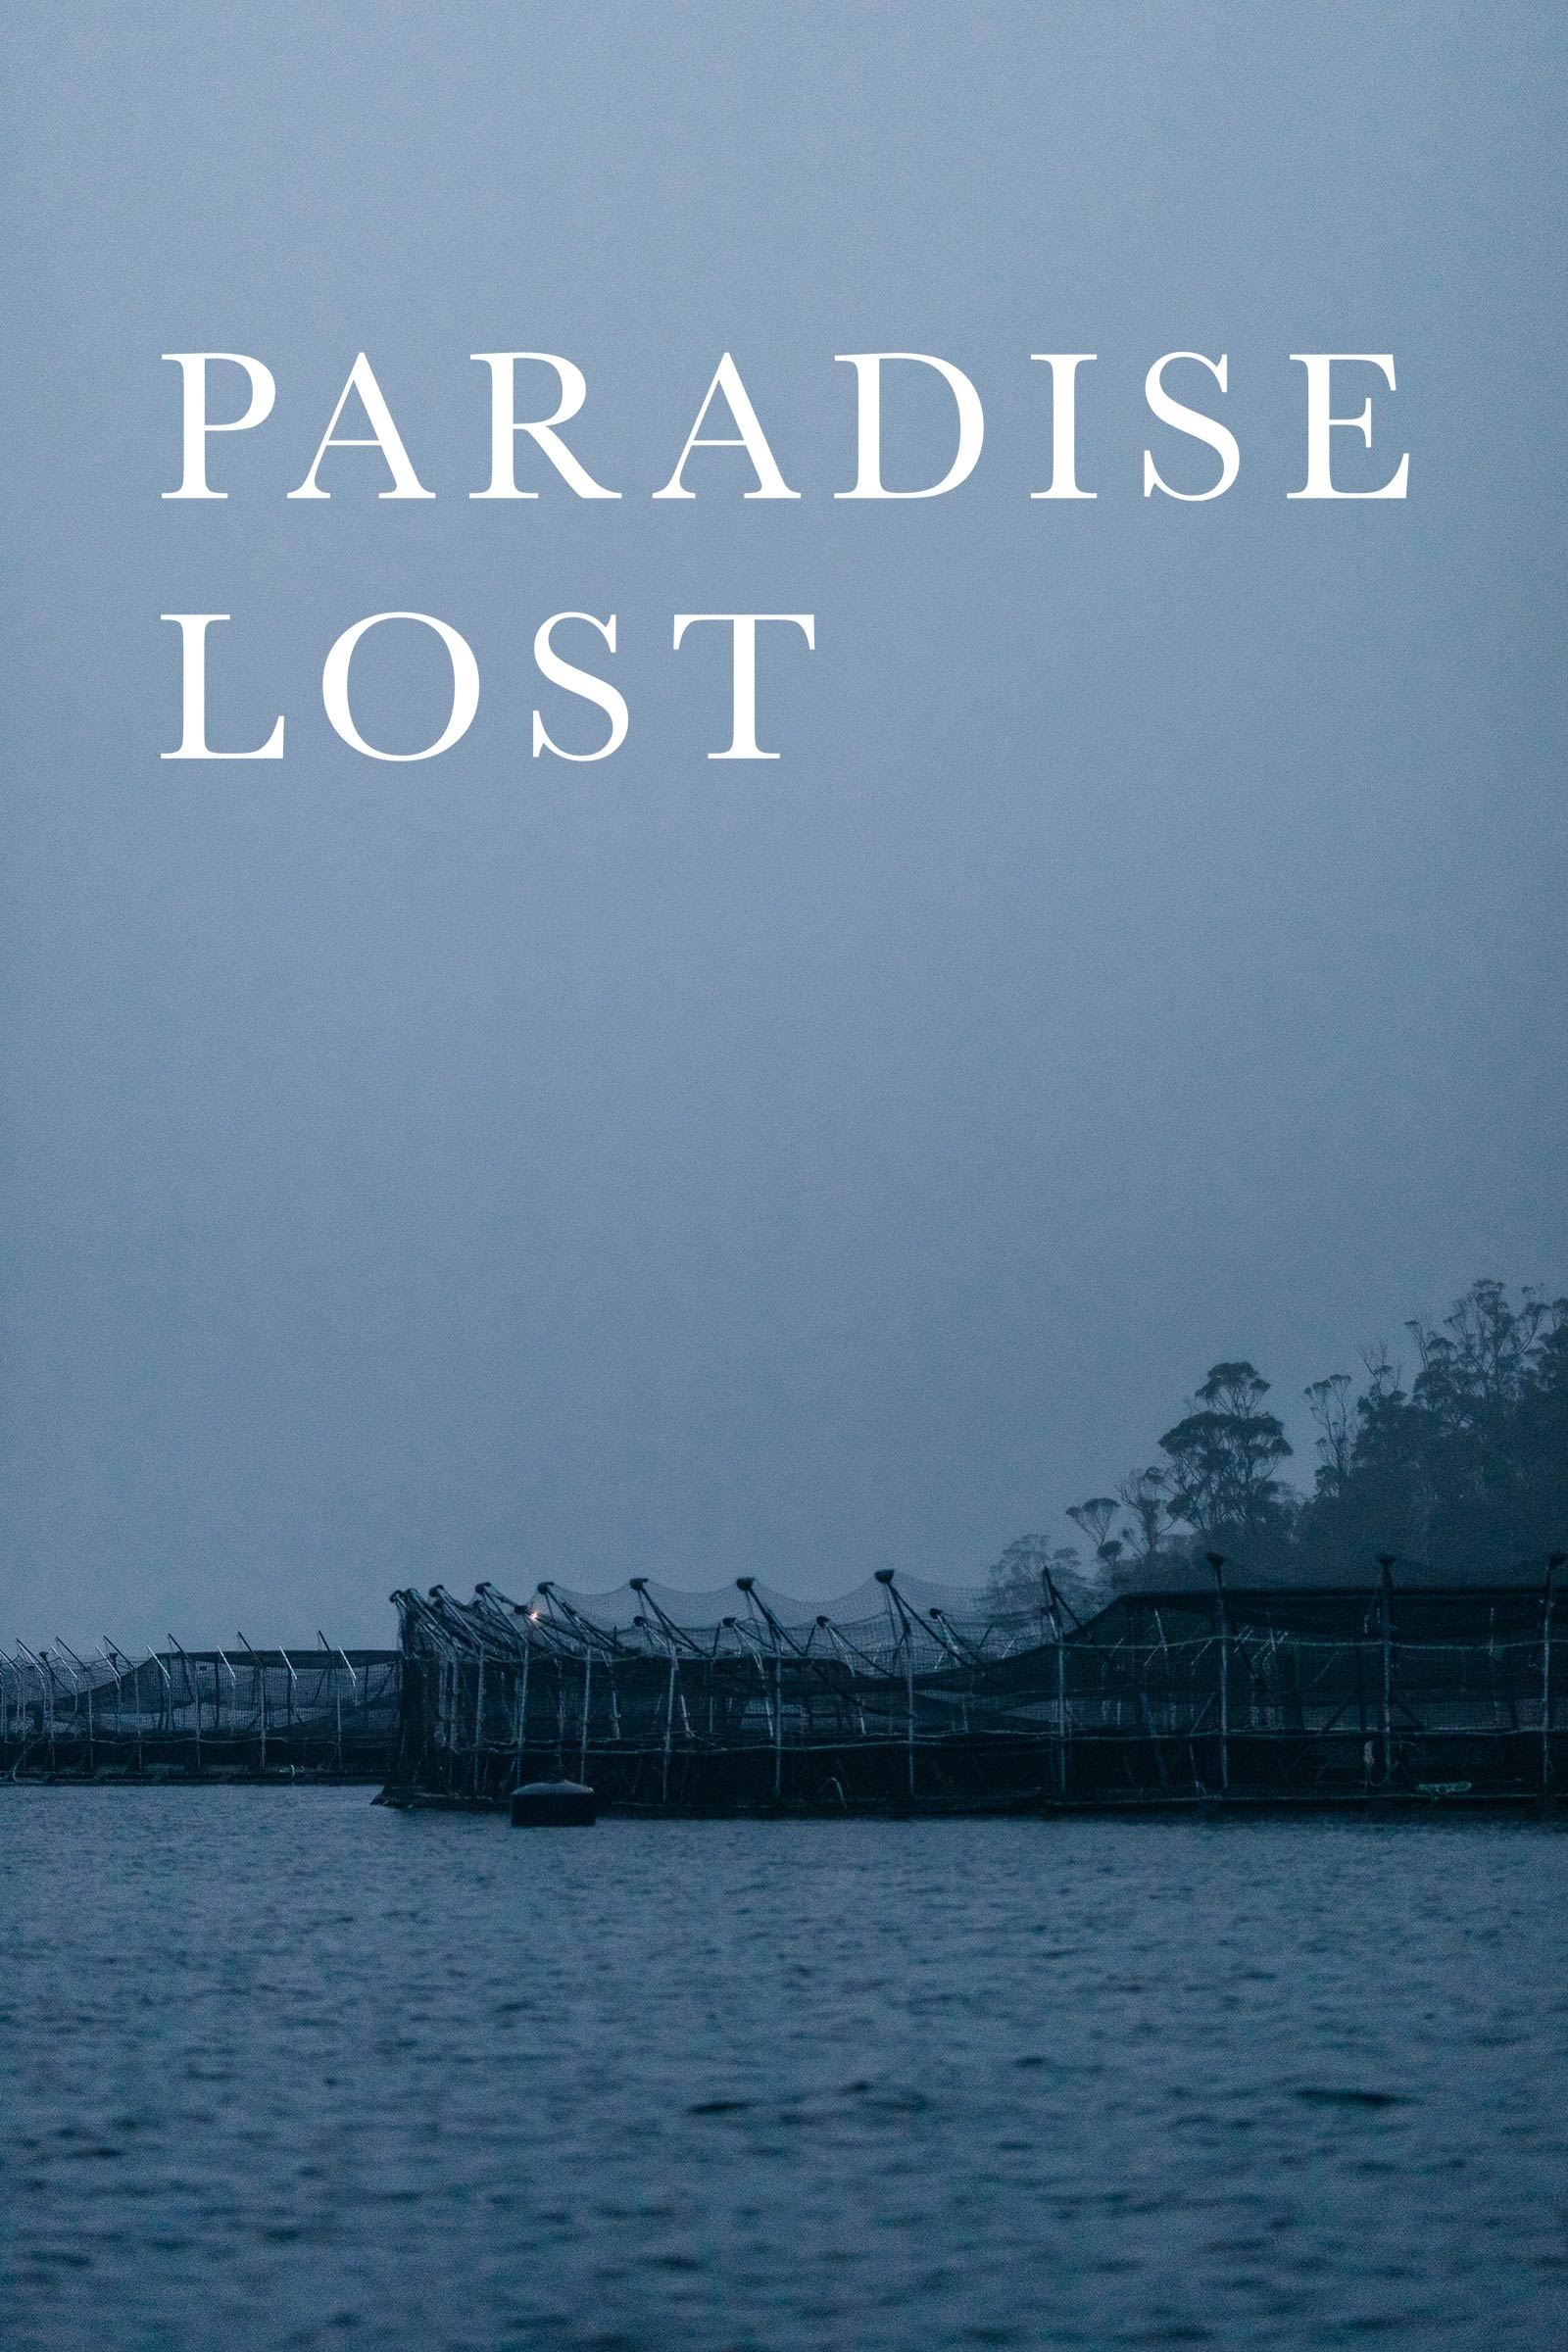 Where to stream Paradise Lost